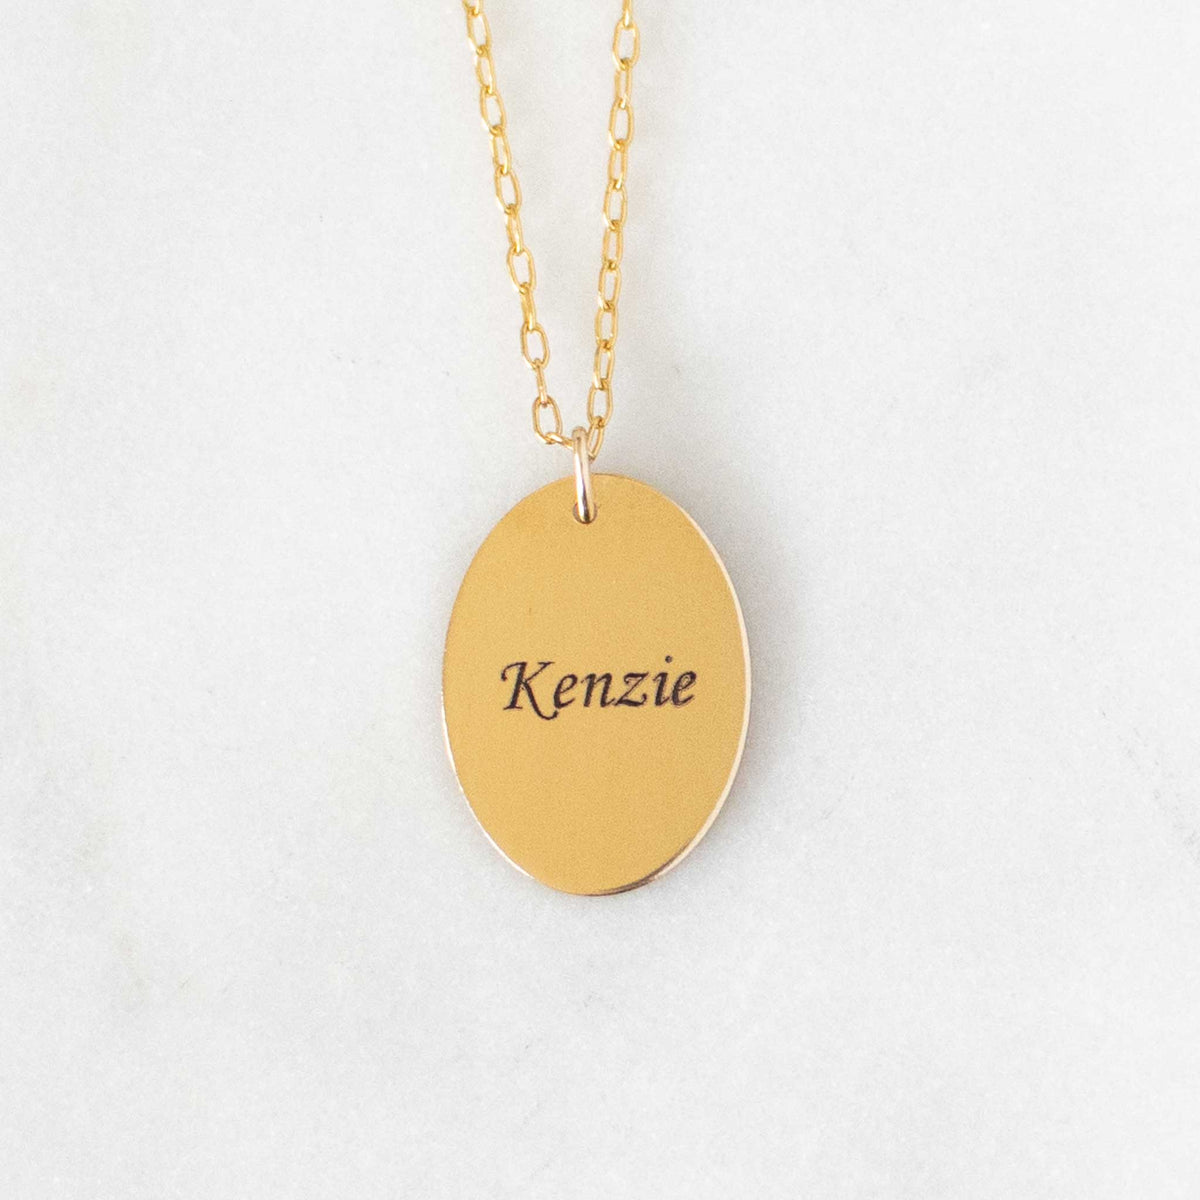 Gold Oval pendant with Kenzie engraved on a solid white background.